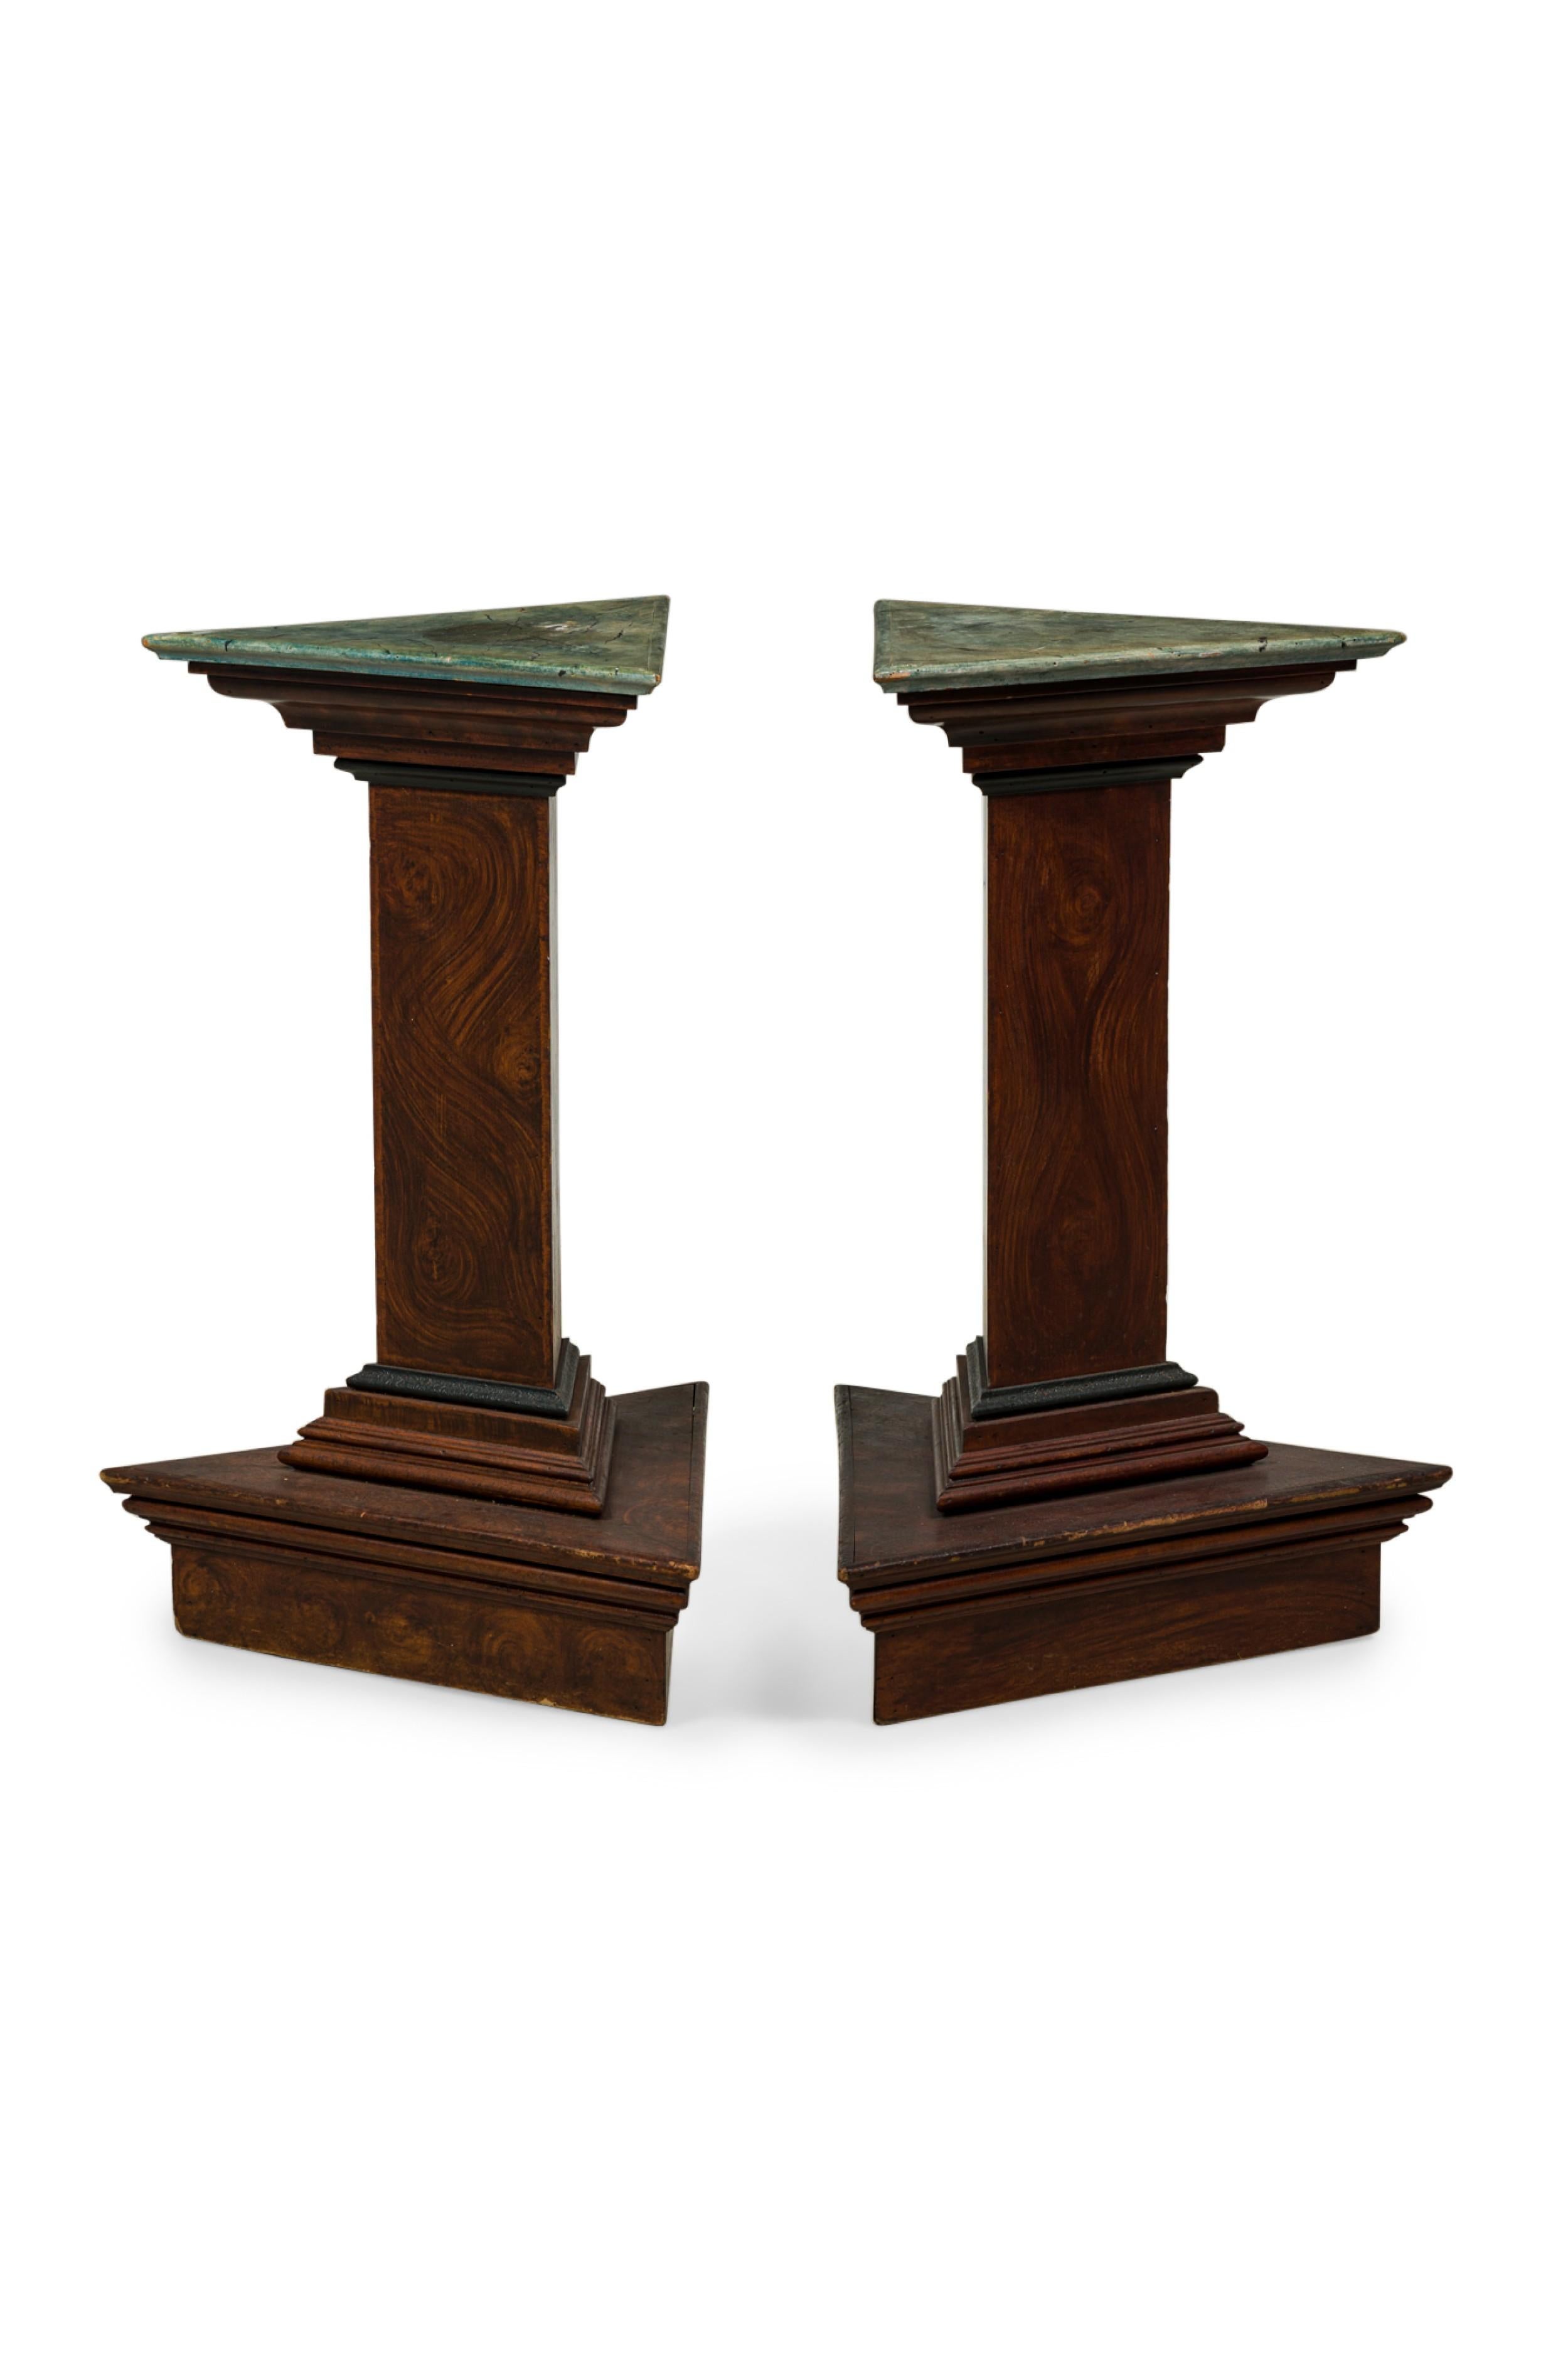 PAIR of Italian Neo-classic style (19/20th Century) dark faux bois (wood) and faux marble painted low pedestals with a triangular shape base and top (PRICED AS PAIR)
